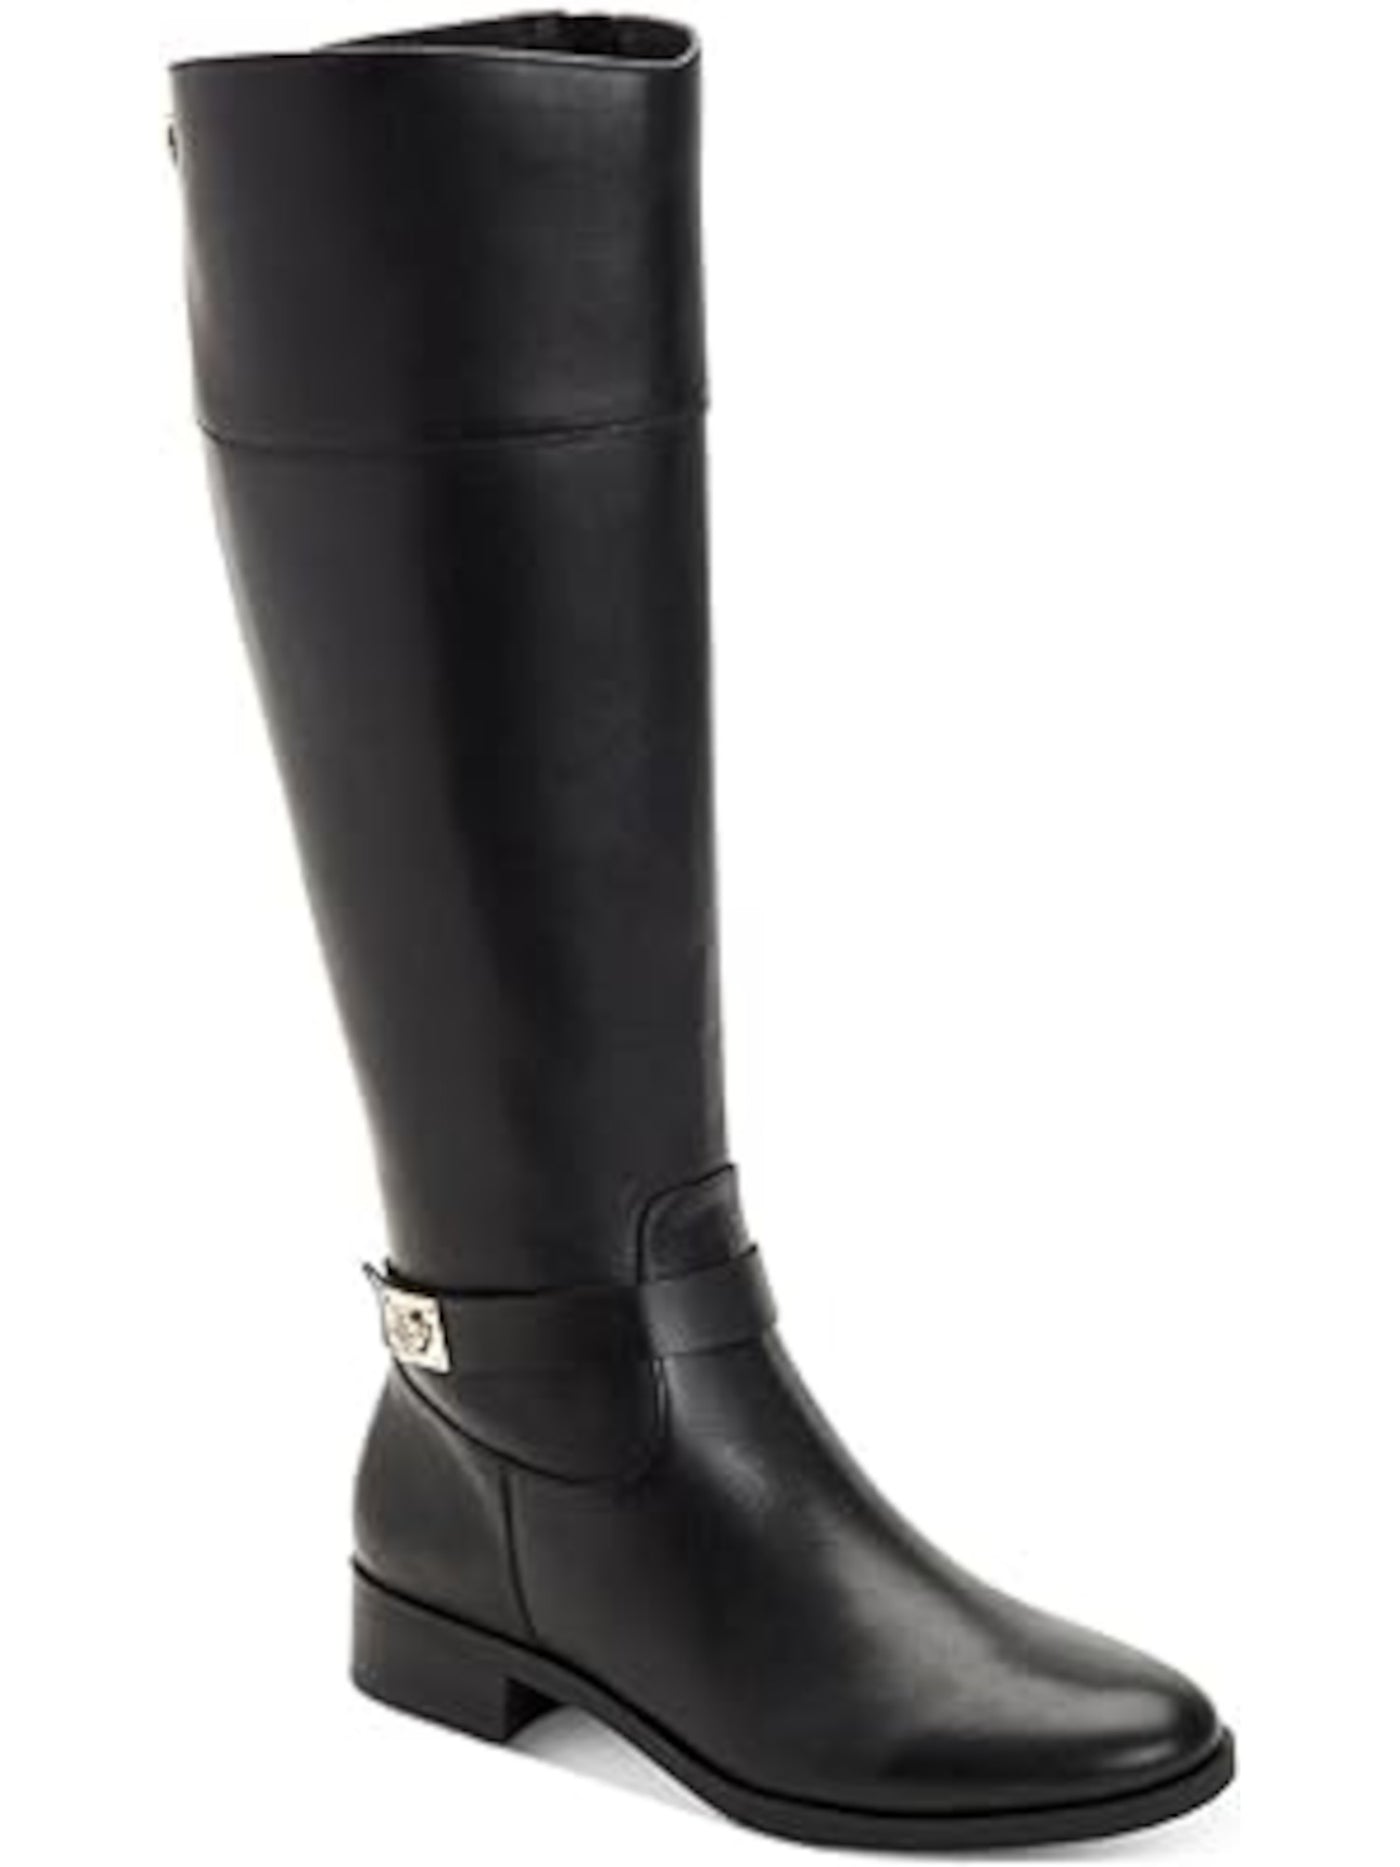 CHARTER CLUB Womens Black Buckle Accent Johannes Round Toe Zip-Up Riding Boot 9 M